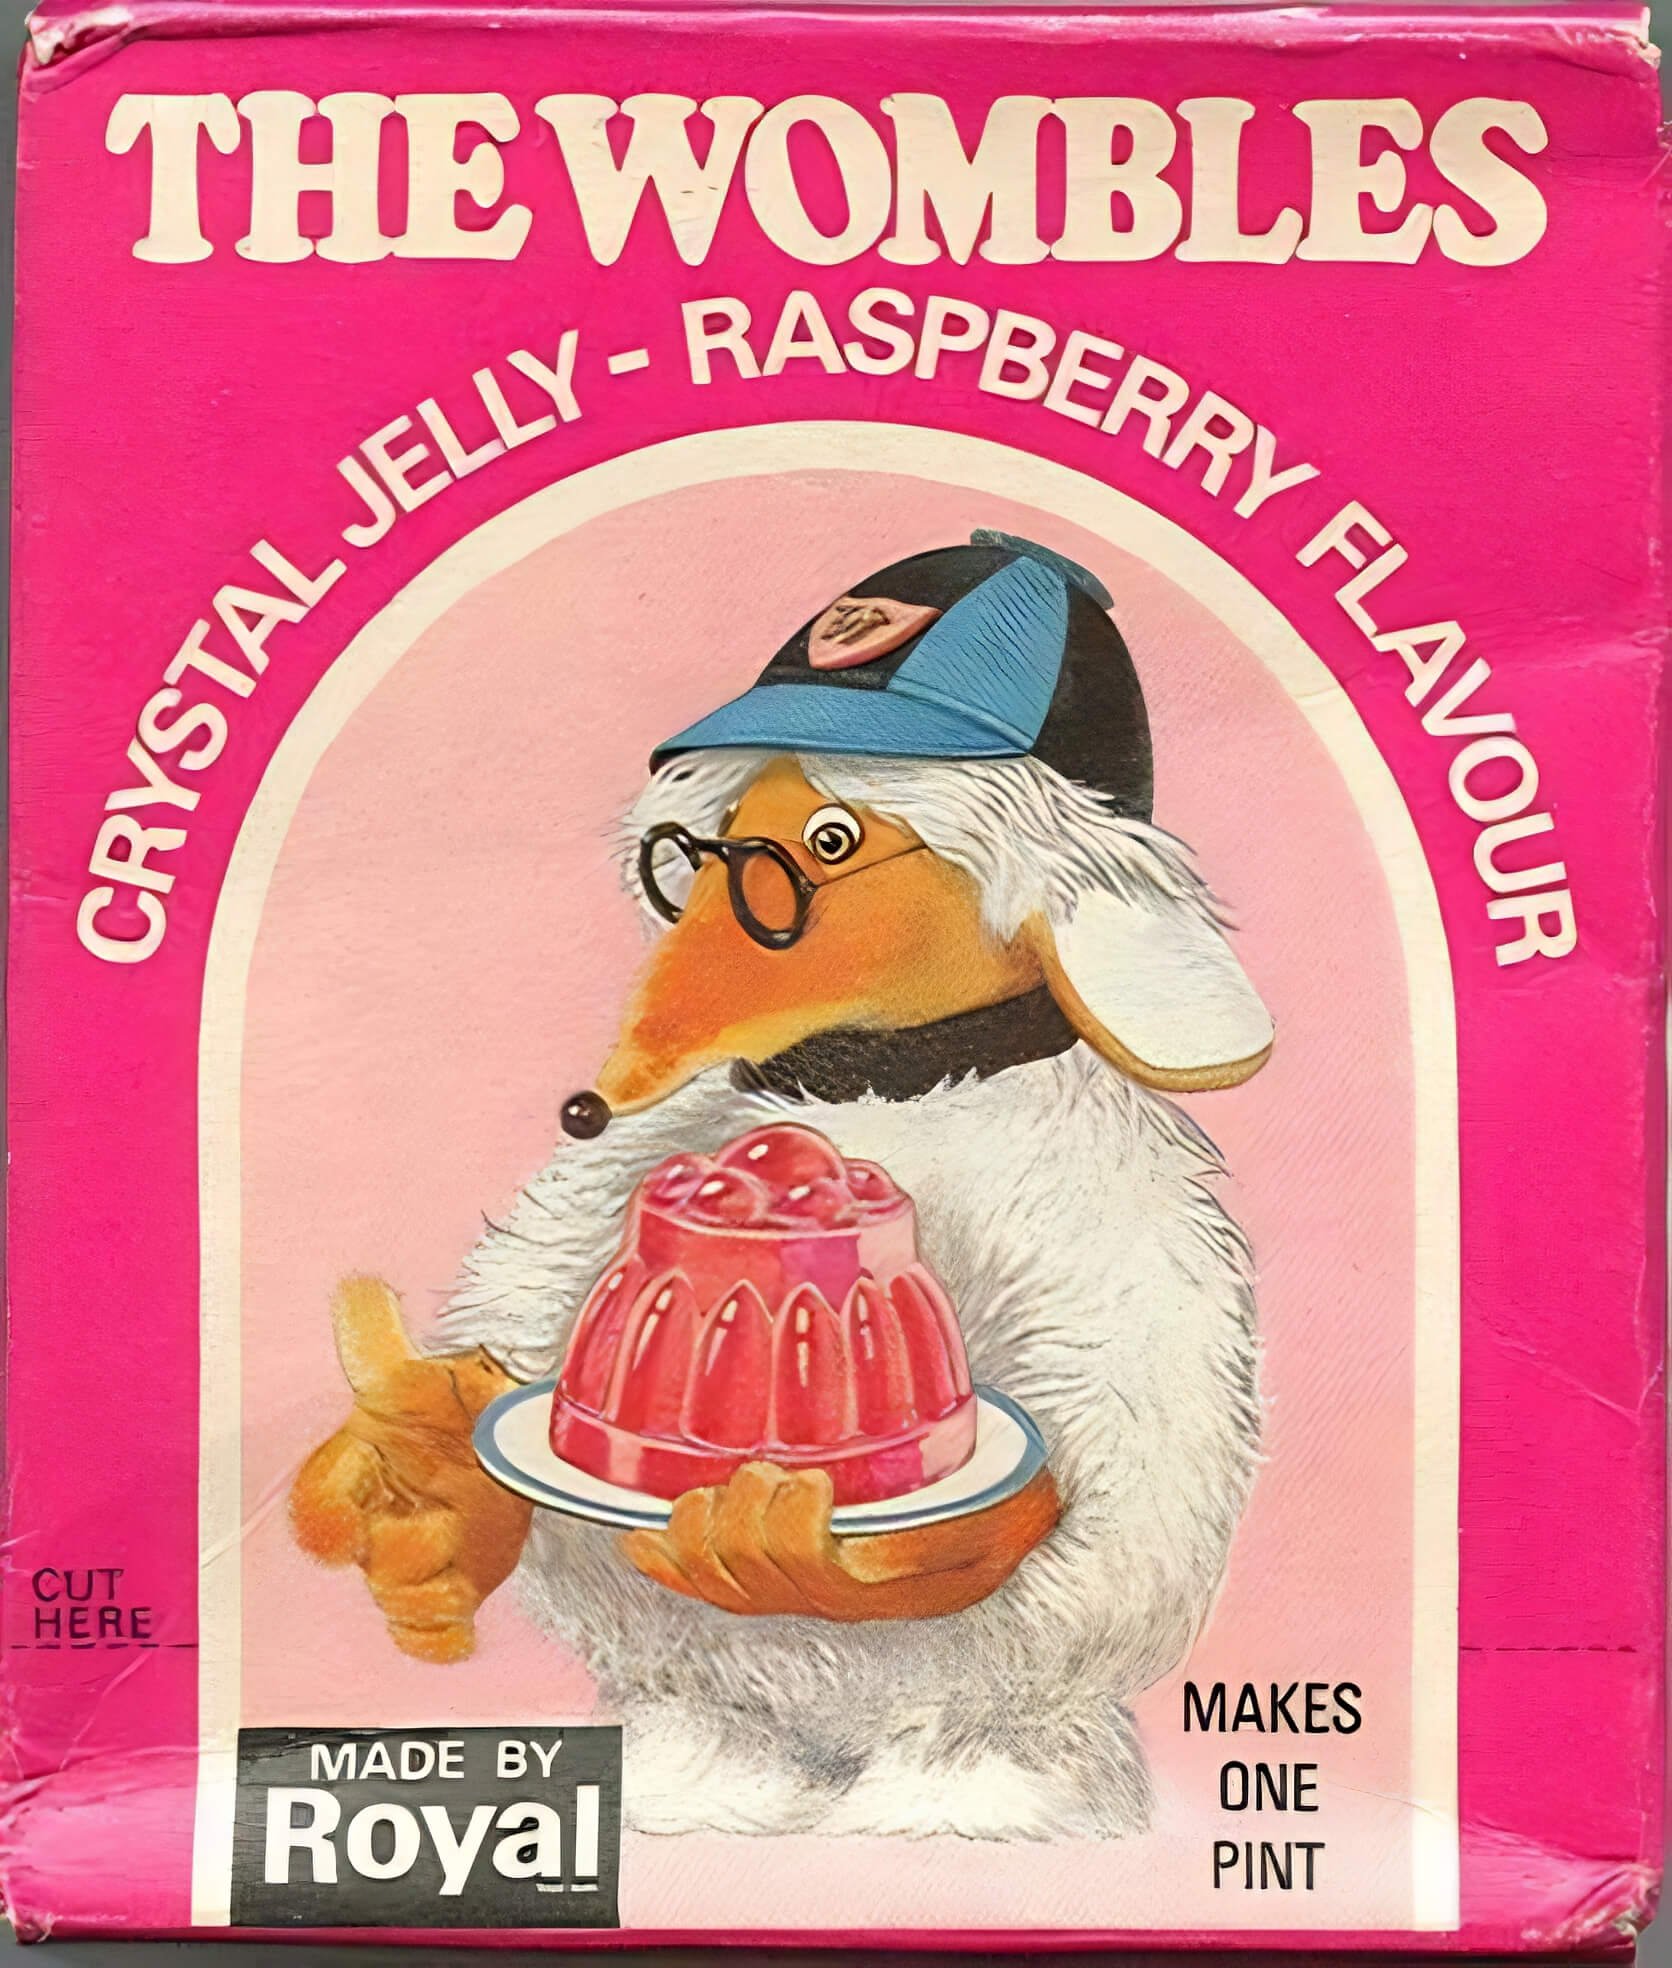 The Wombles Raspberry Jelly by Royal. Pink packaging feat. Wellington